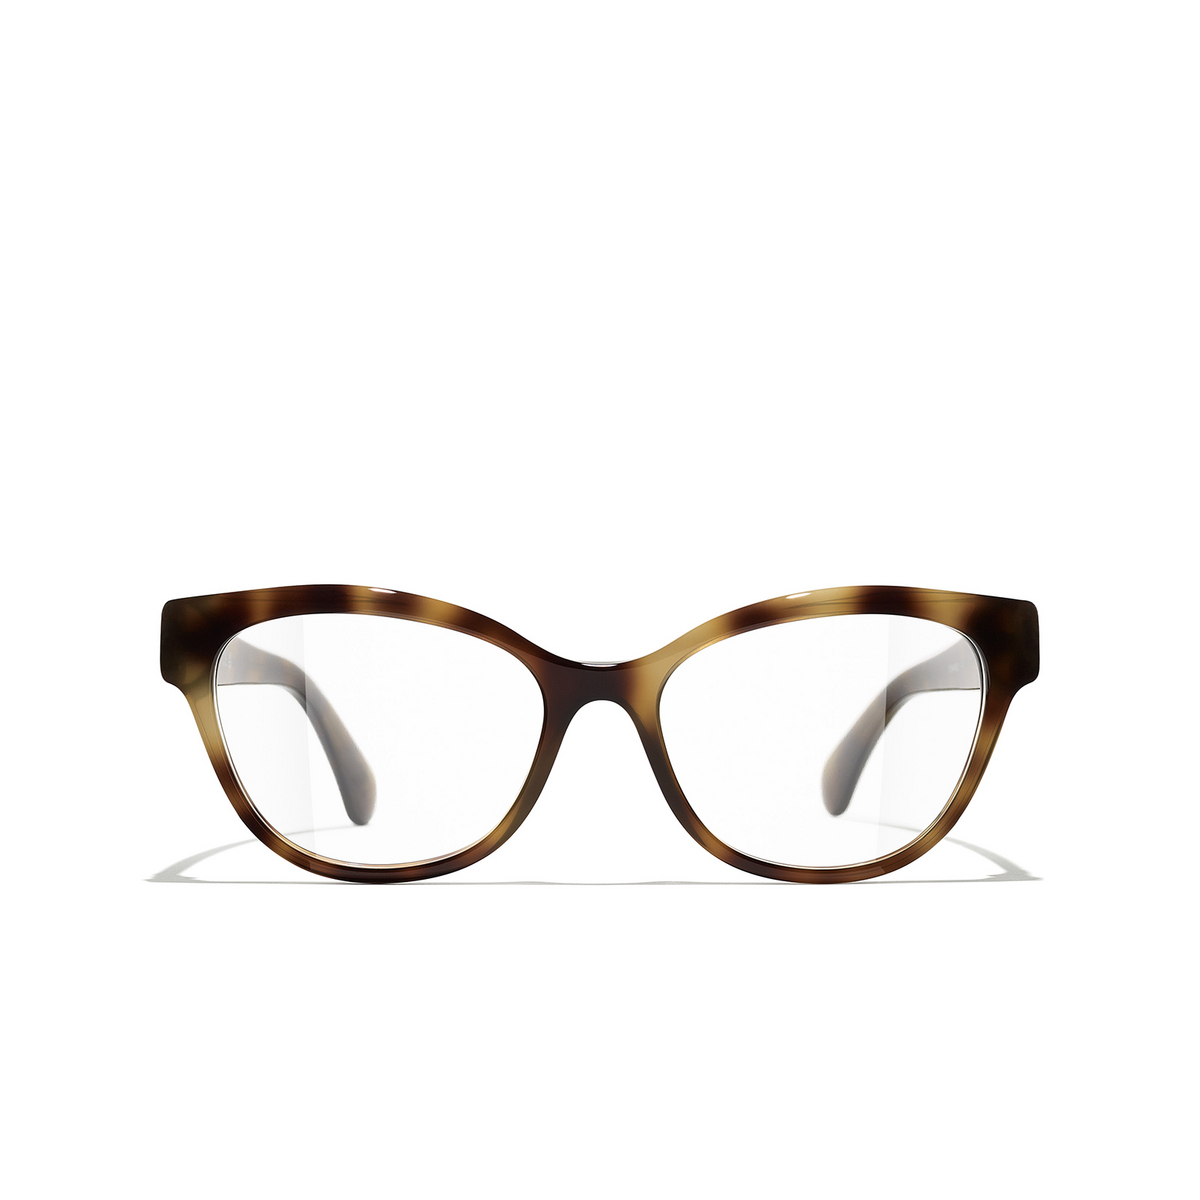 CHANEL square Eyeglasses 1717 Tortoise - front view